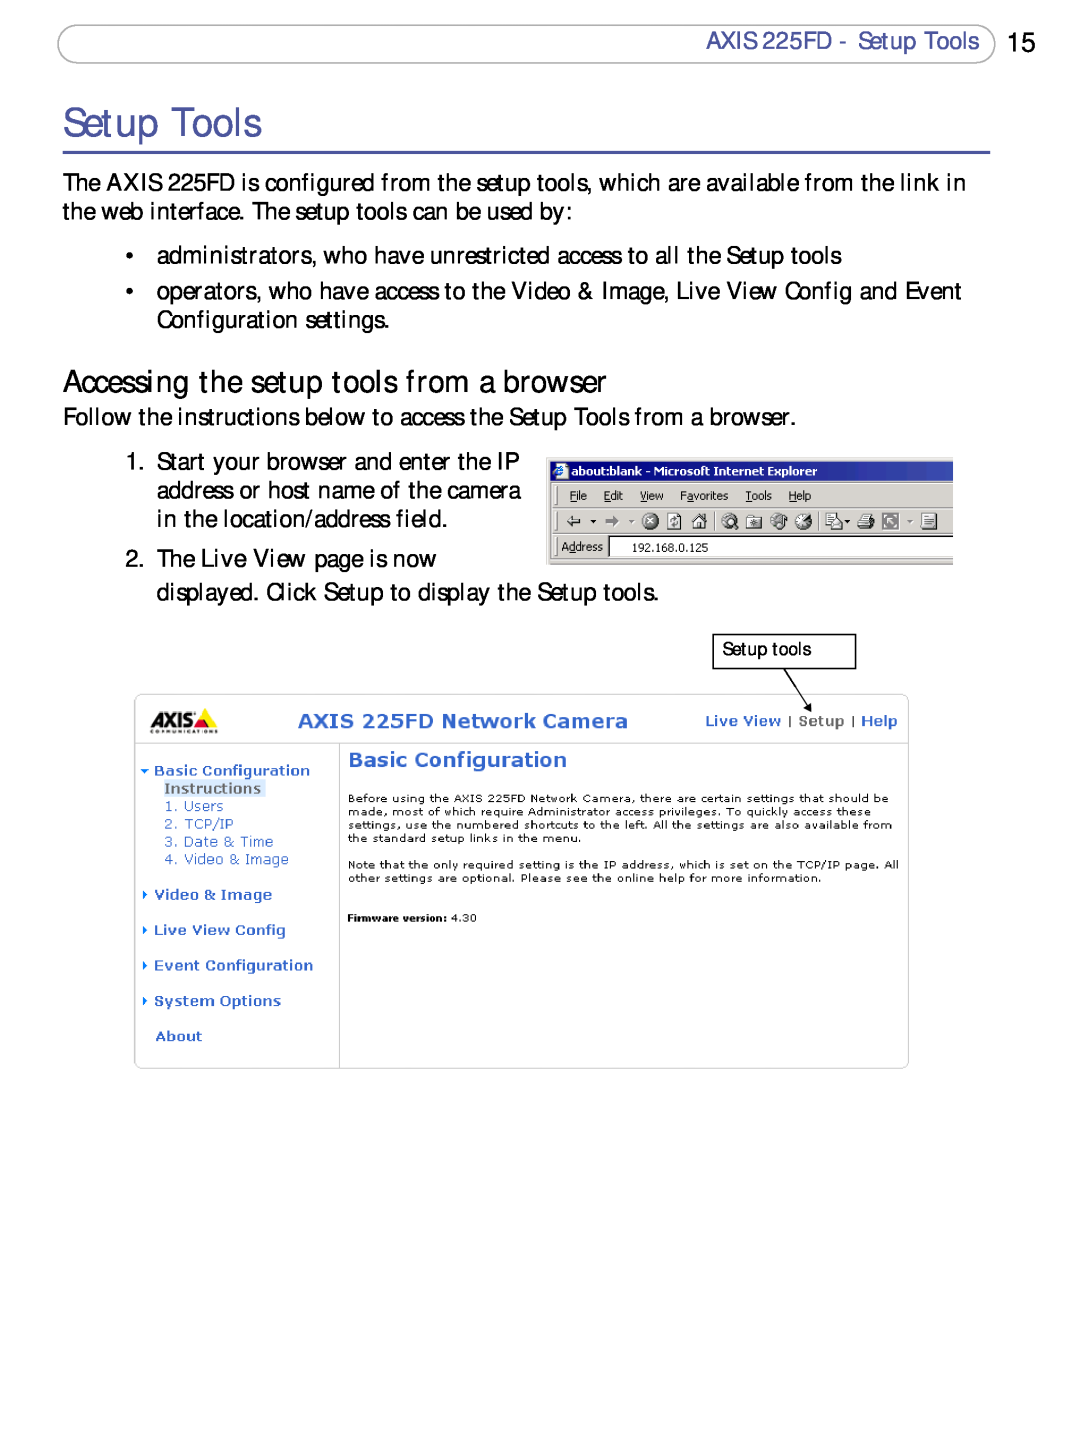 Axis Communications user manual Accessing the setup tools from a browser, AXIS 225FD - Setup Tools 